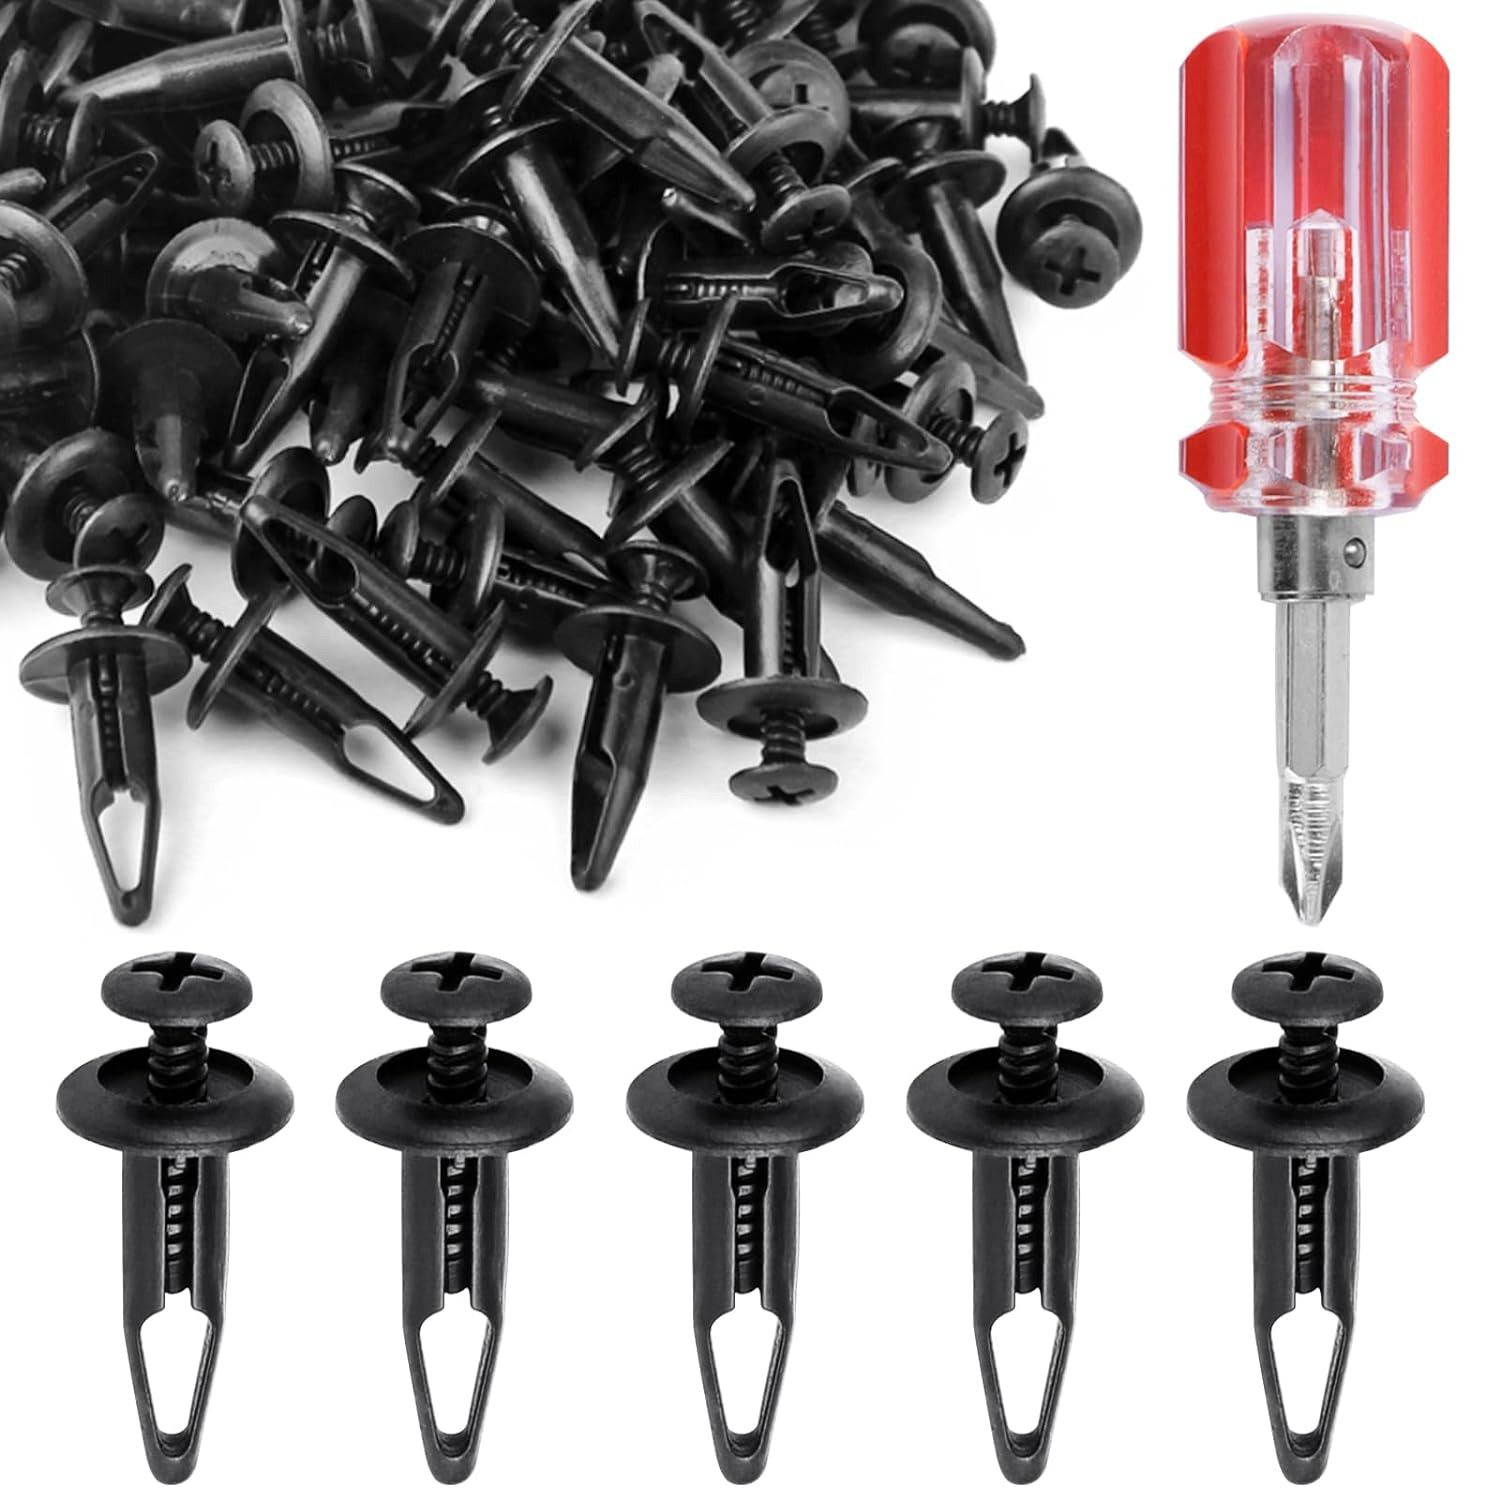 100 Pcs Plastic Rivets Compatible with Rhino 450 660 700 Grizzly 600 ATV Body Fe